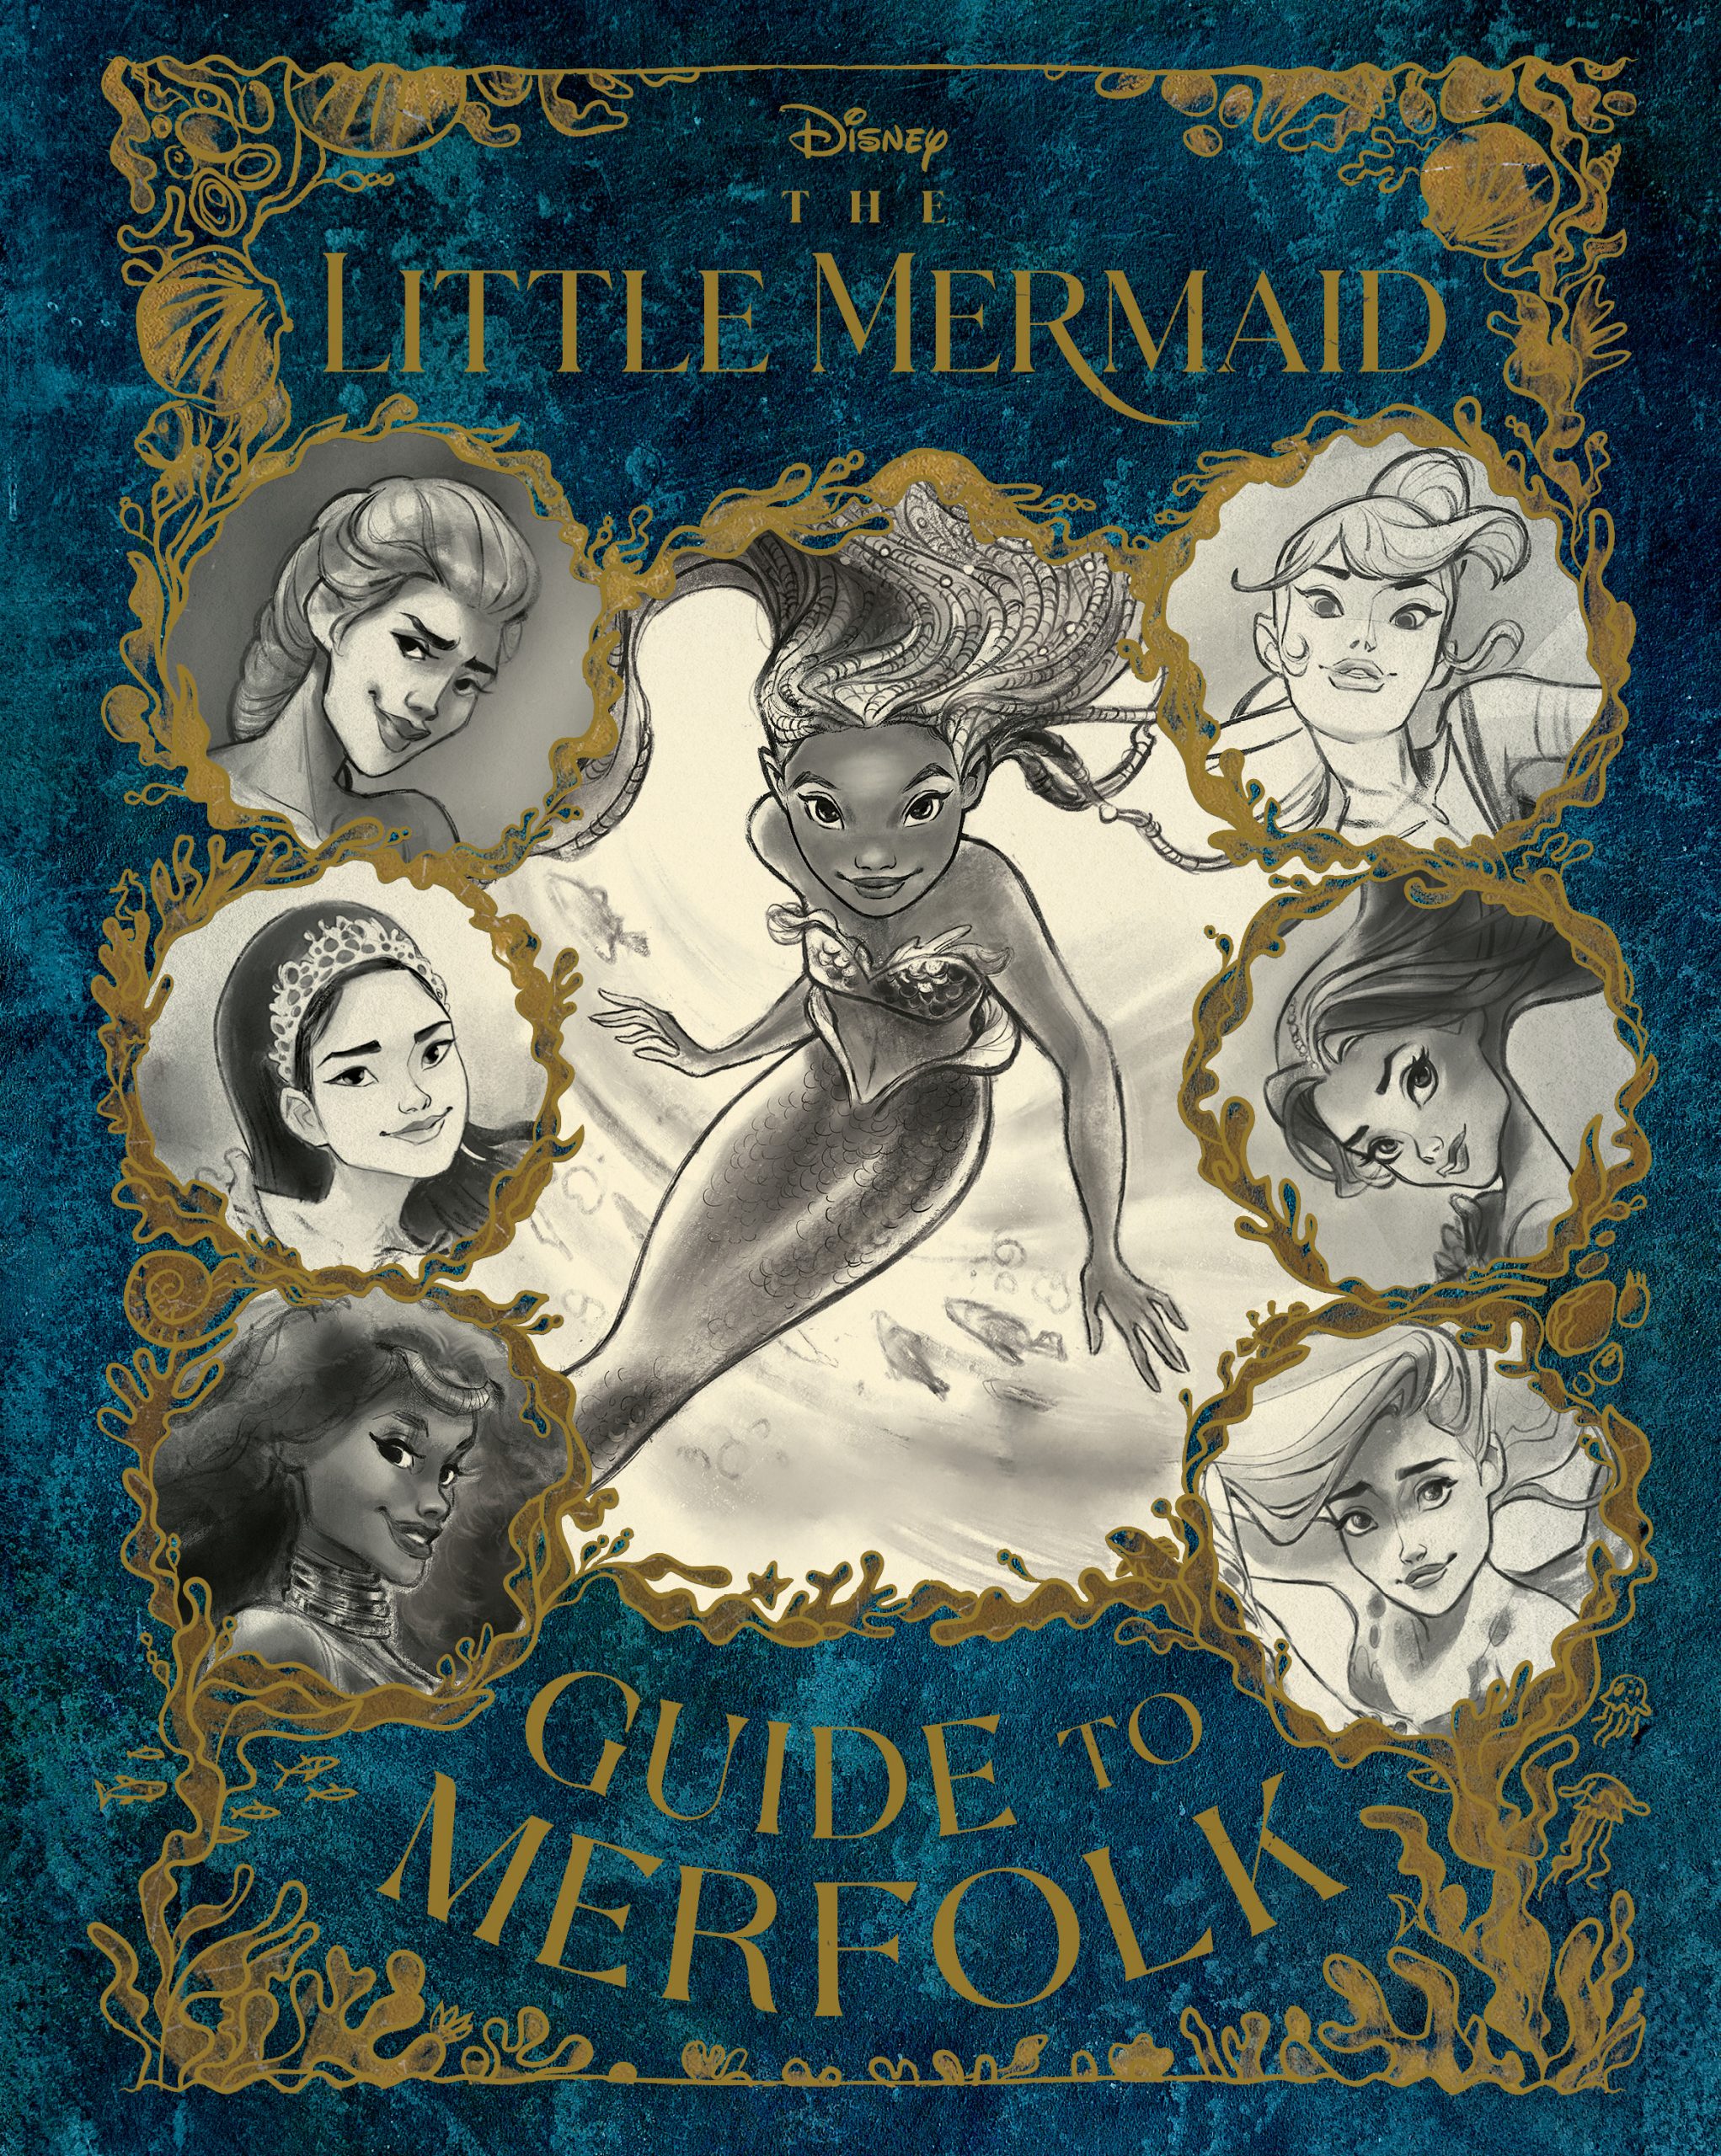 The Little Mermaid Guide to Merfolk by Eric Geron Books